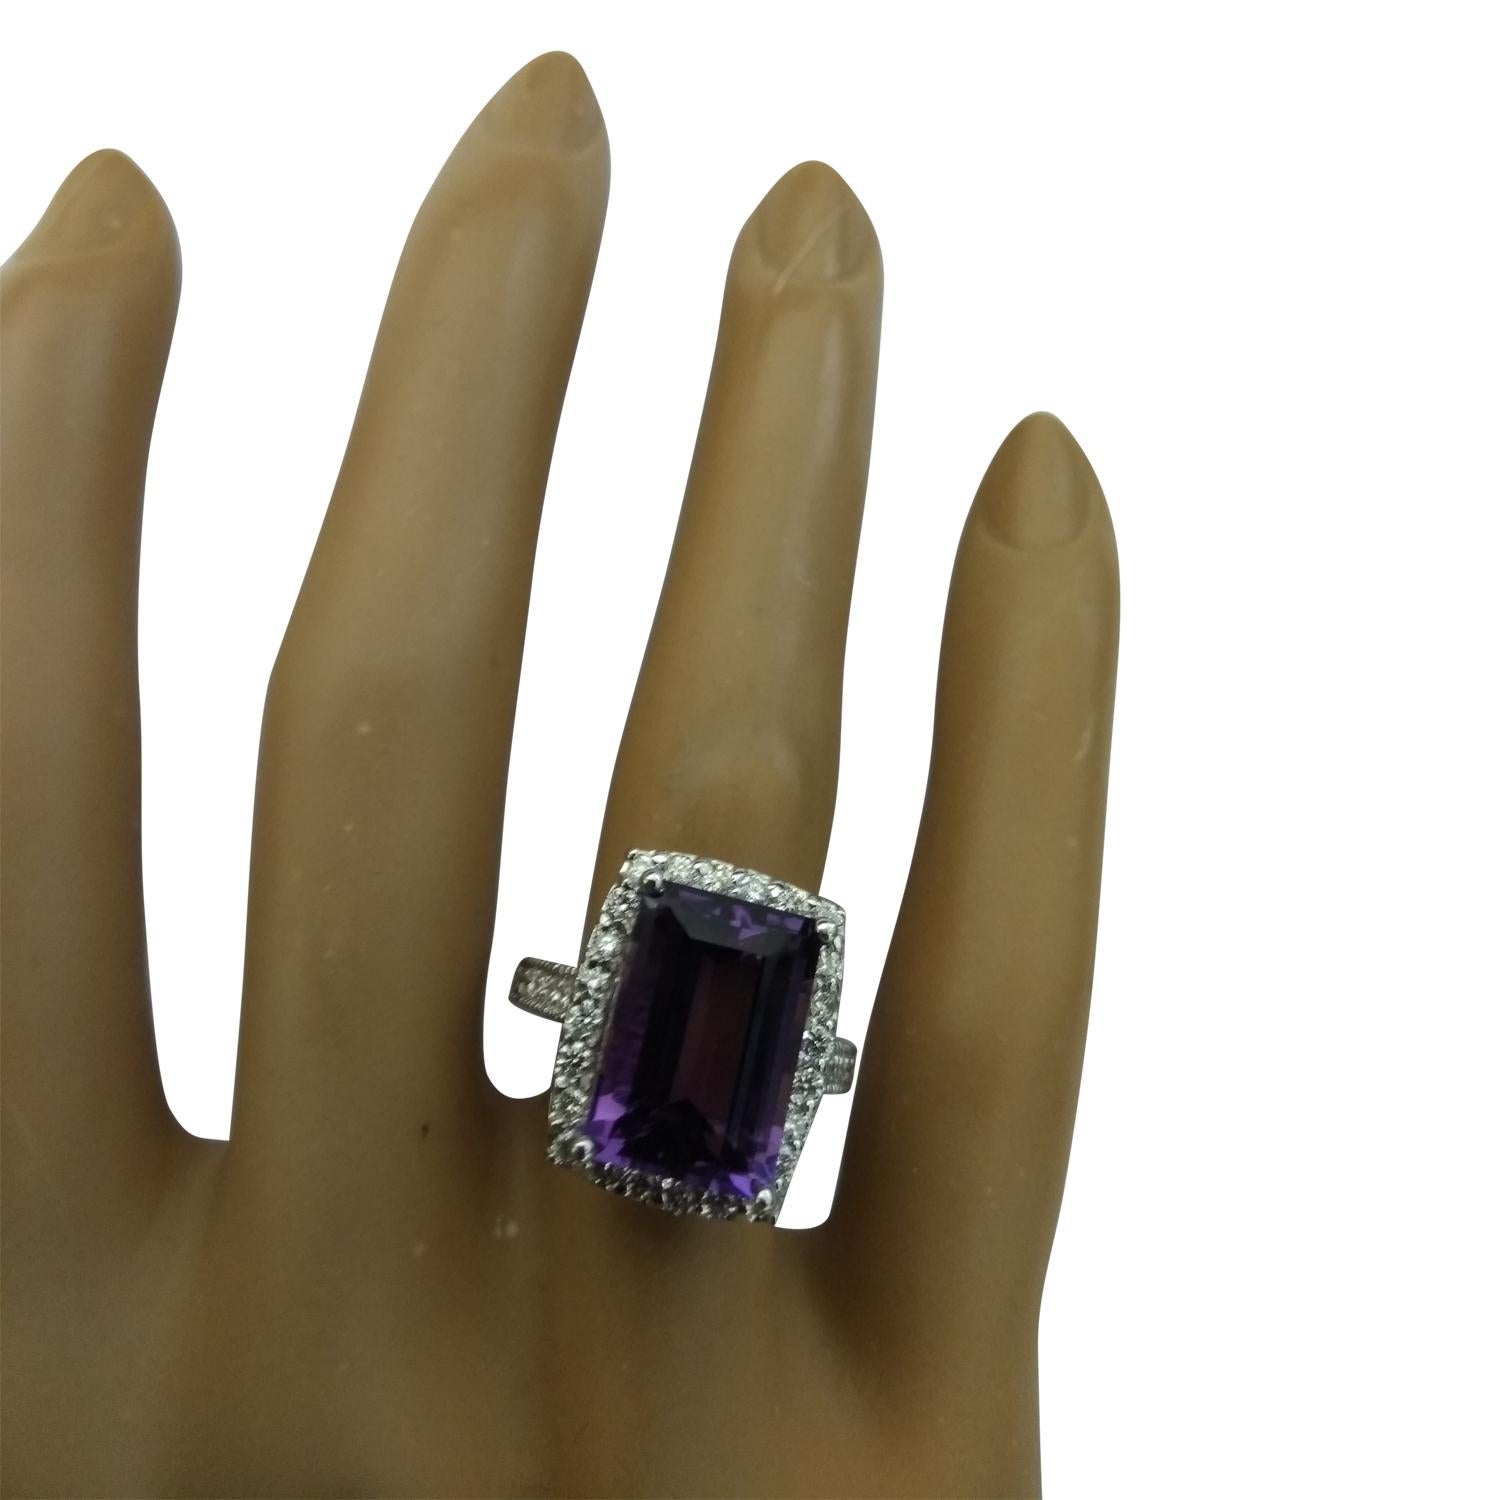 7.09 Carat Natural Amethyst 14 Karat Solid White Gold Diamond Ring
Stamped: 14K 
Total Ring Weight: 6 Grams 
Amethyst Weight 6.29 Carat (14.00x10.00 Millimeters)
Diamond Weight: 0.80 carat (F-G Color, VS2-SI1 Clarity )
Quantity: 34
Face Measures: